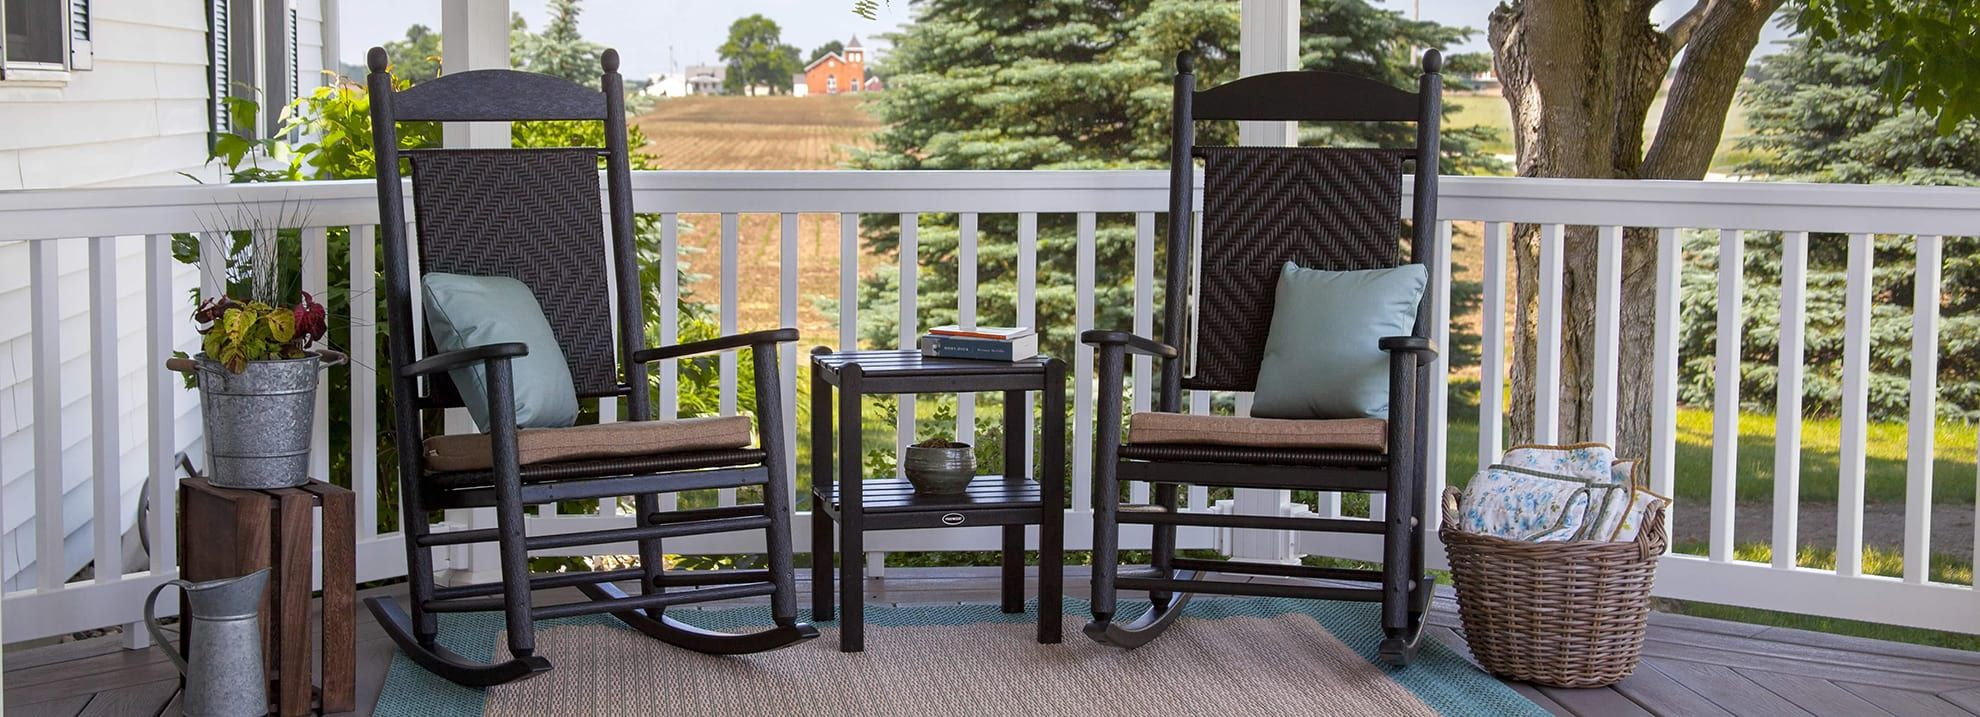 Outdoor Front Porch Furniture | Porch Table, Chairs, Porch in Front Porch Patio Furniture